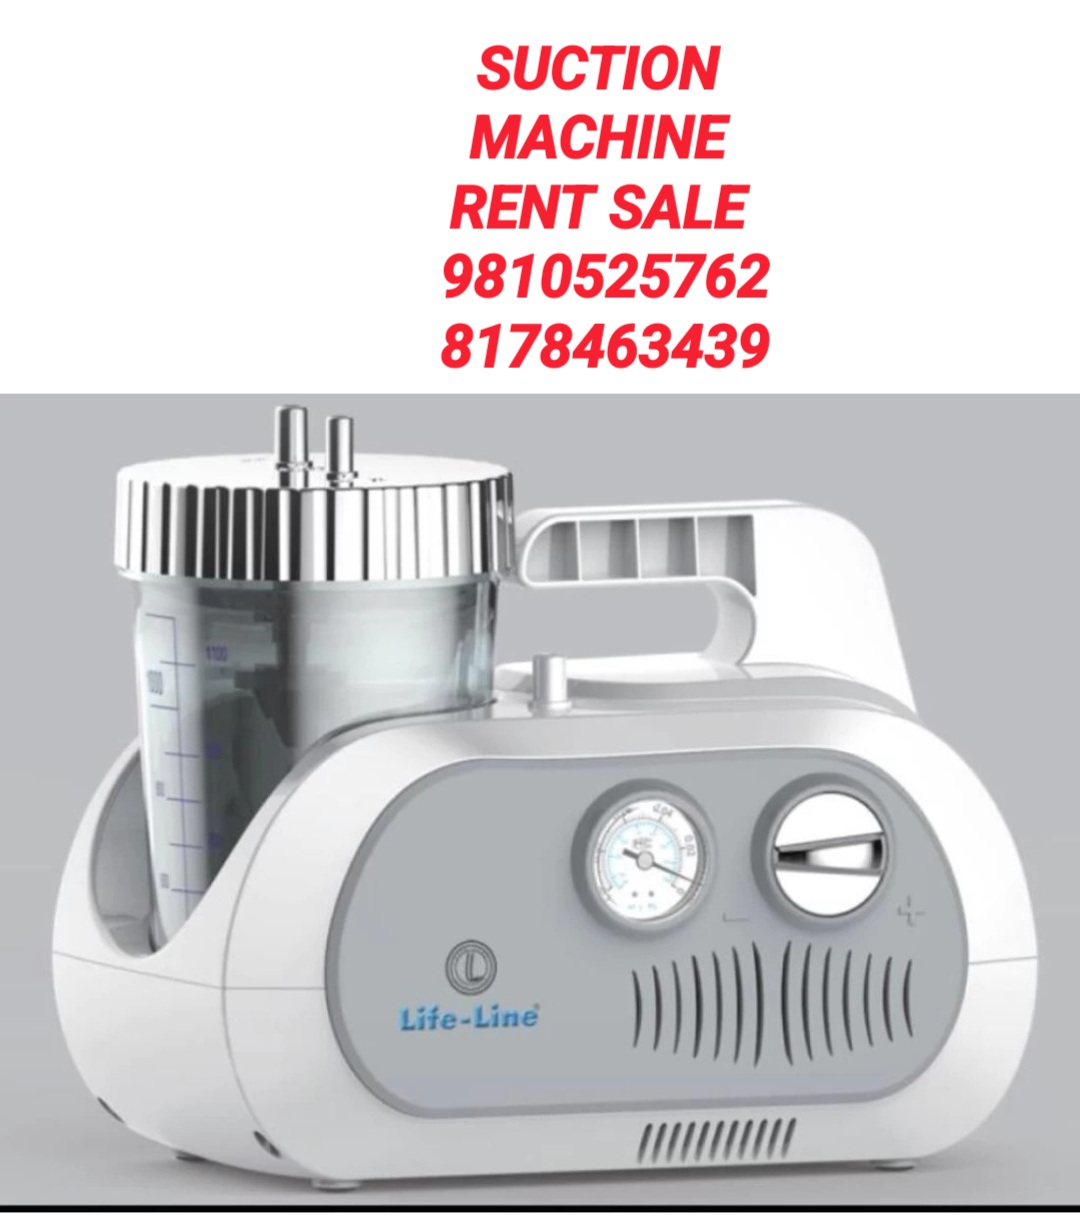 Suction Machine Hire Rs 2499 Call 8178463439